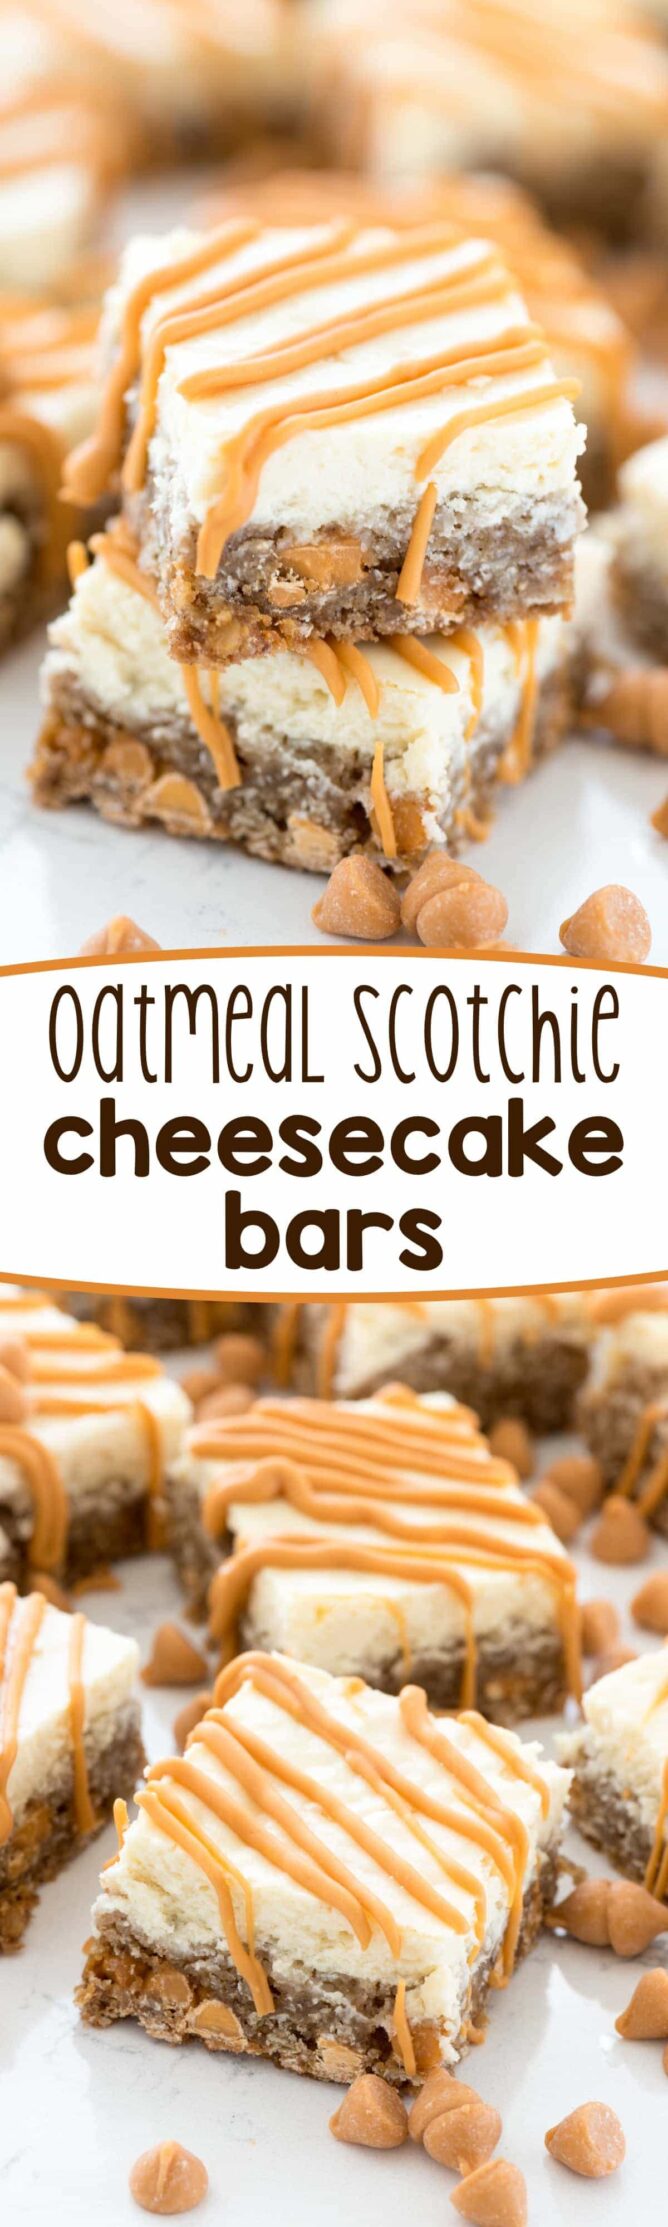 collage of oatmeal scotchie cheesecake bars